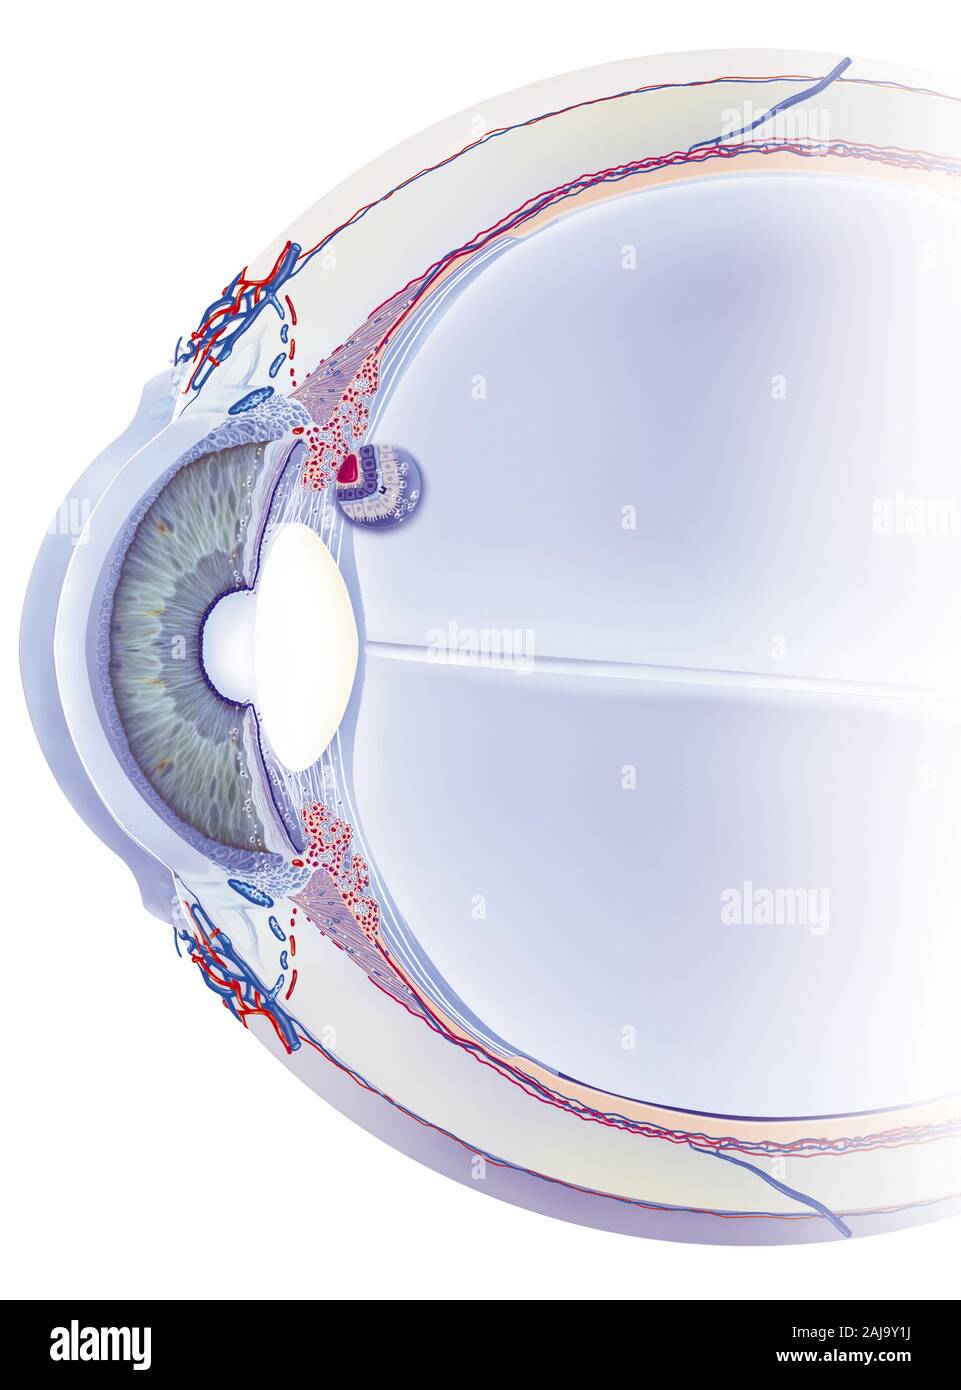 Schlemm canal, trabeculum, aqueous humor, treatments. Sagittal section of the eye with, behind the cornea, the anterior chamber, the iris and the crys Stock Photo